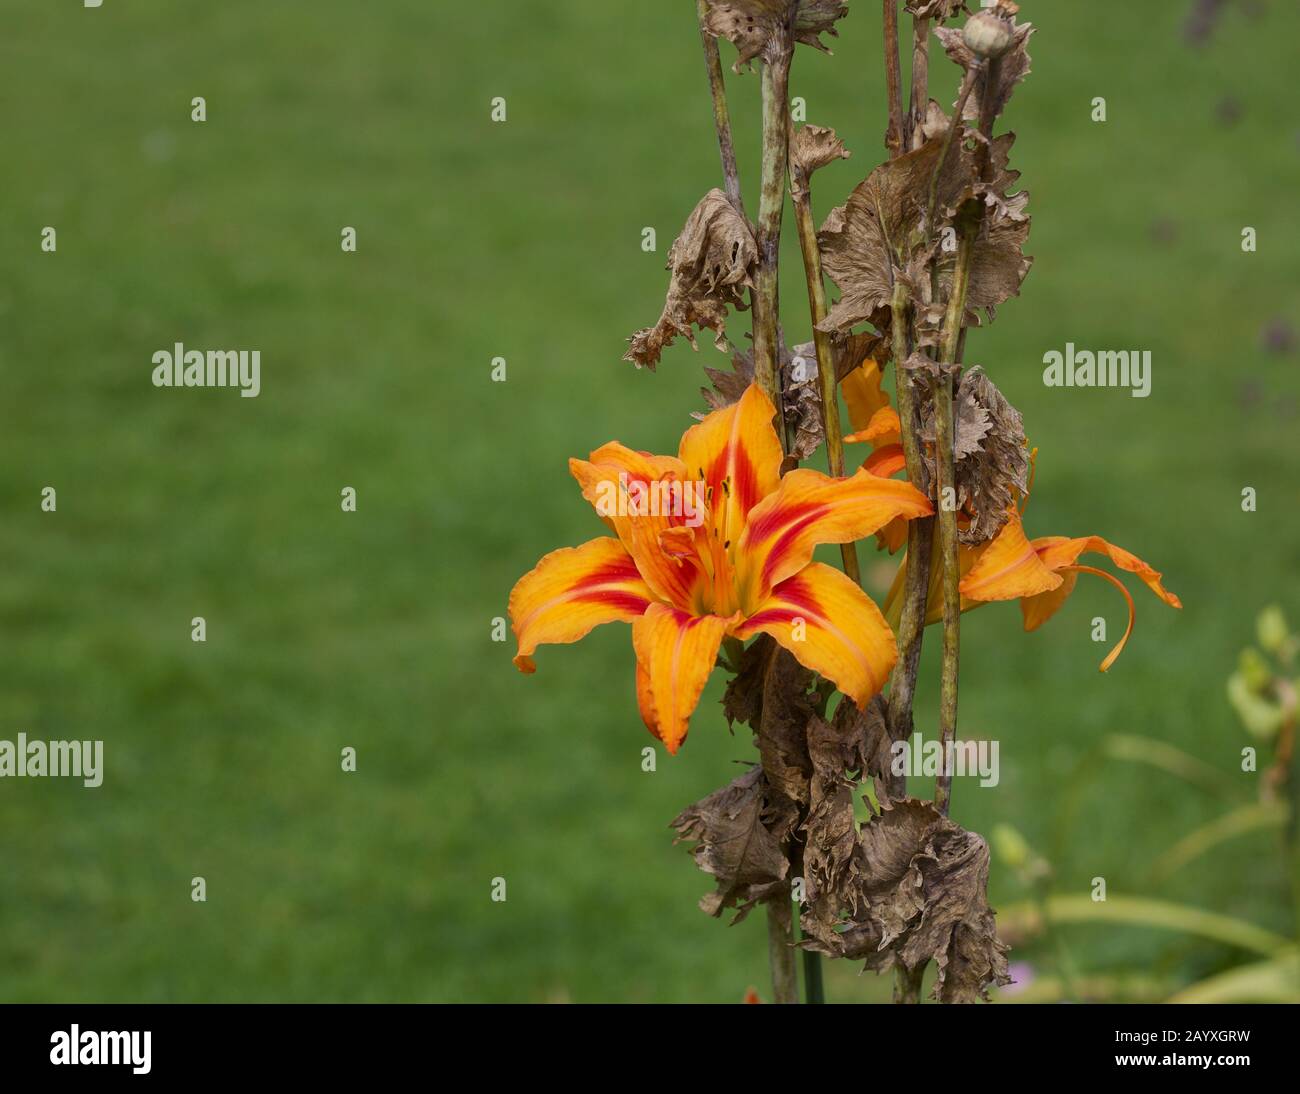 Beautiful orange lily against grass background with copy space Stock Photo